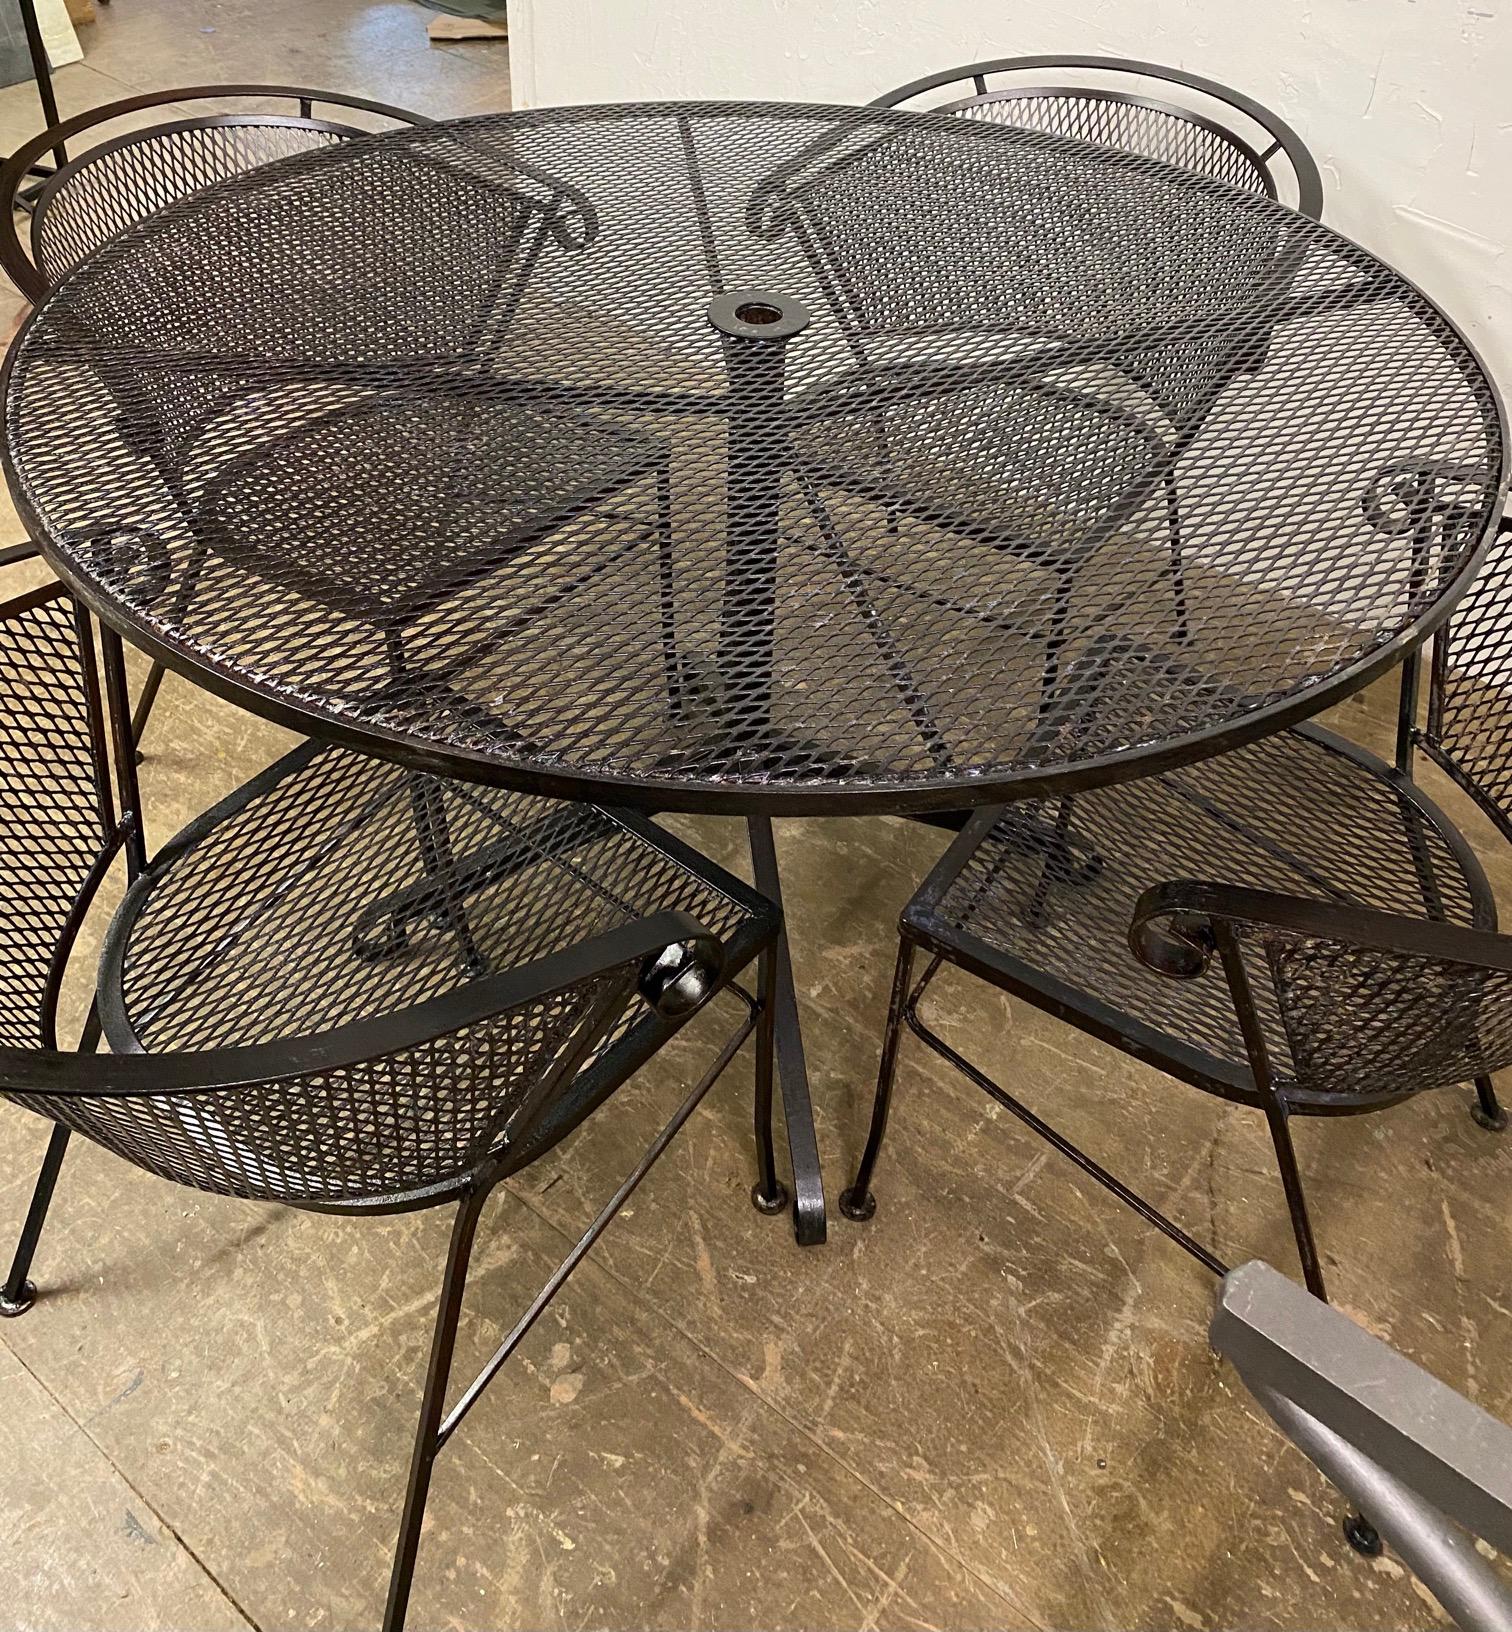 North American Set of 5 Piece Round Patio Garden Dining Table and 4 Arm Chairs For Sale